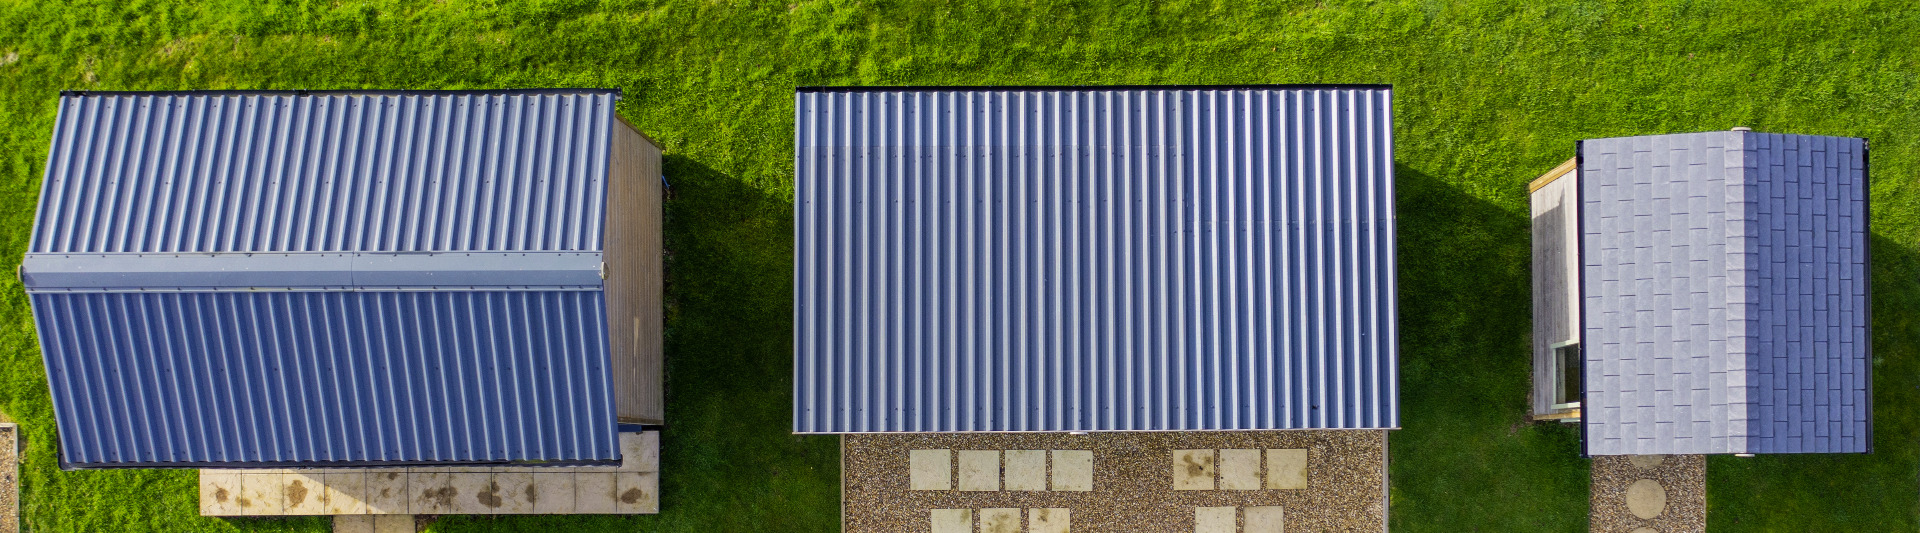 Shields Buildings Corrugated shed Roofs